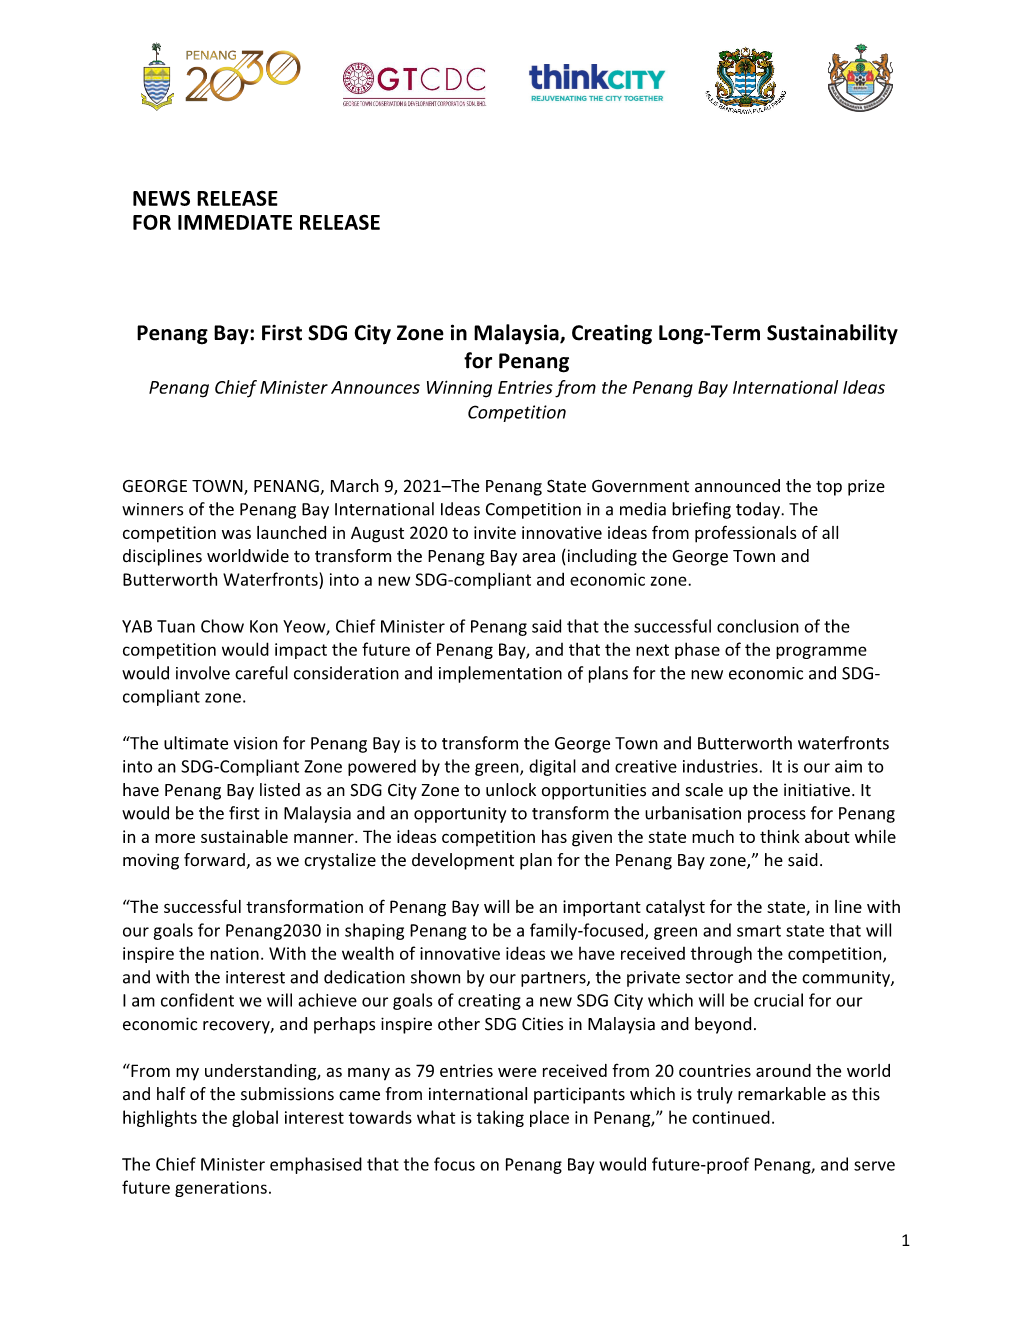 NEWS RELEASE for IMMEDIATE RELEASE Penang Bay: First SDG City Zone in Malaysia, Creating Long-Term Sustainability for Penang